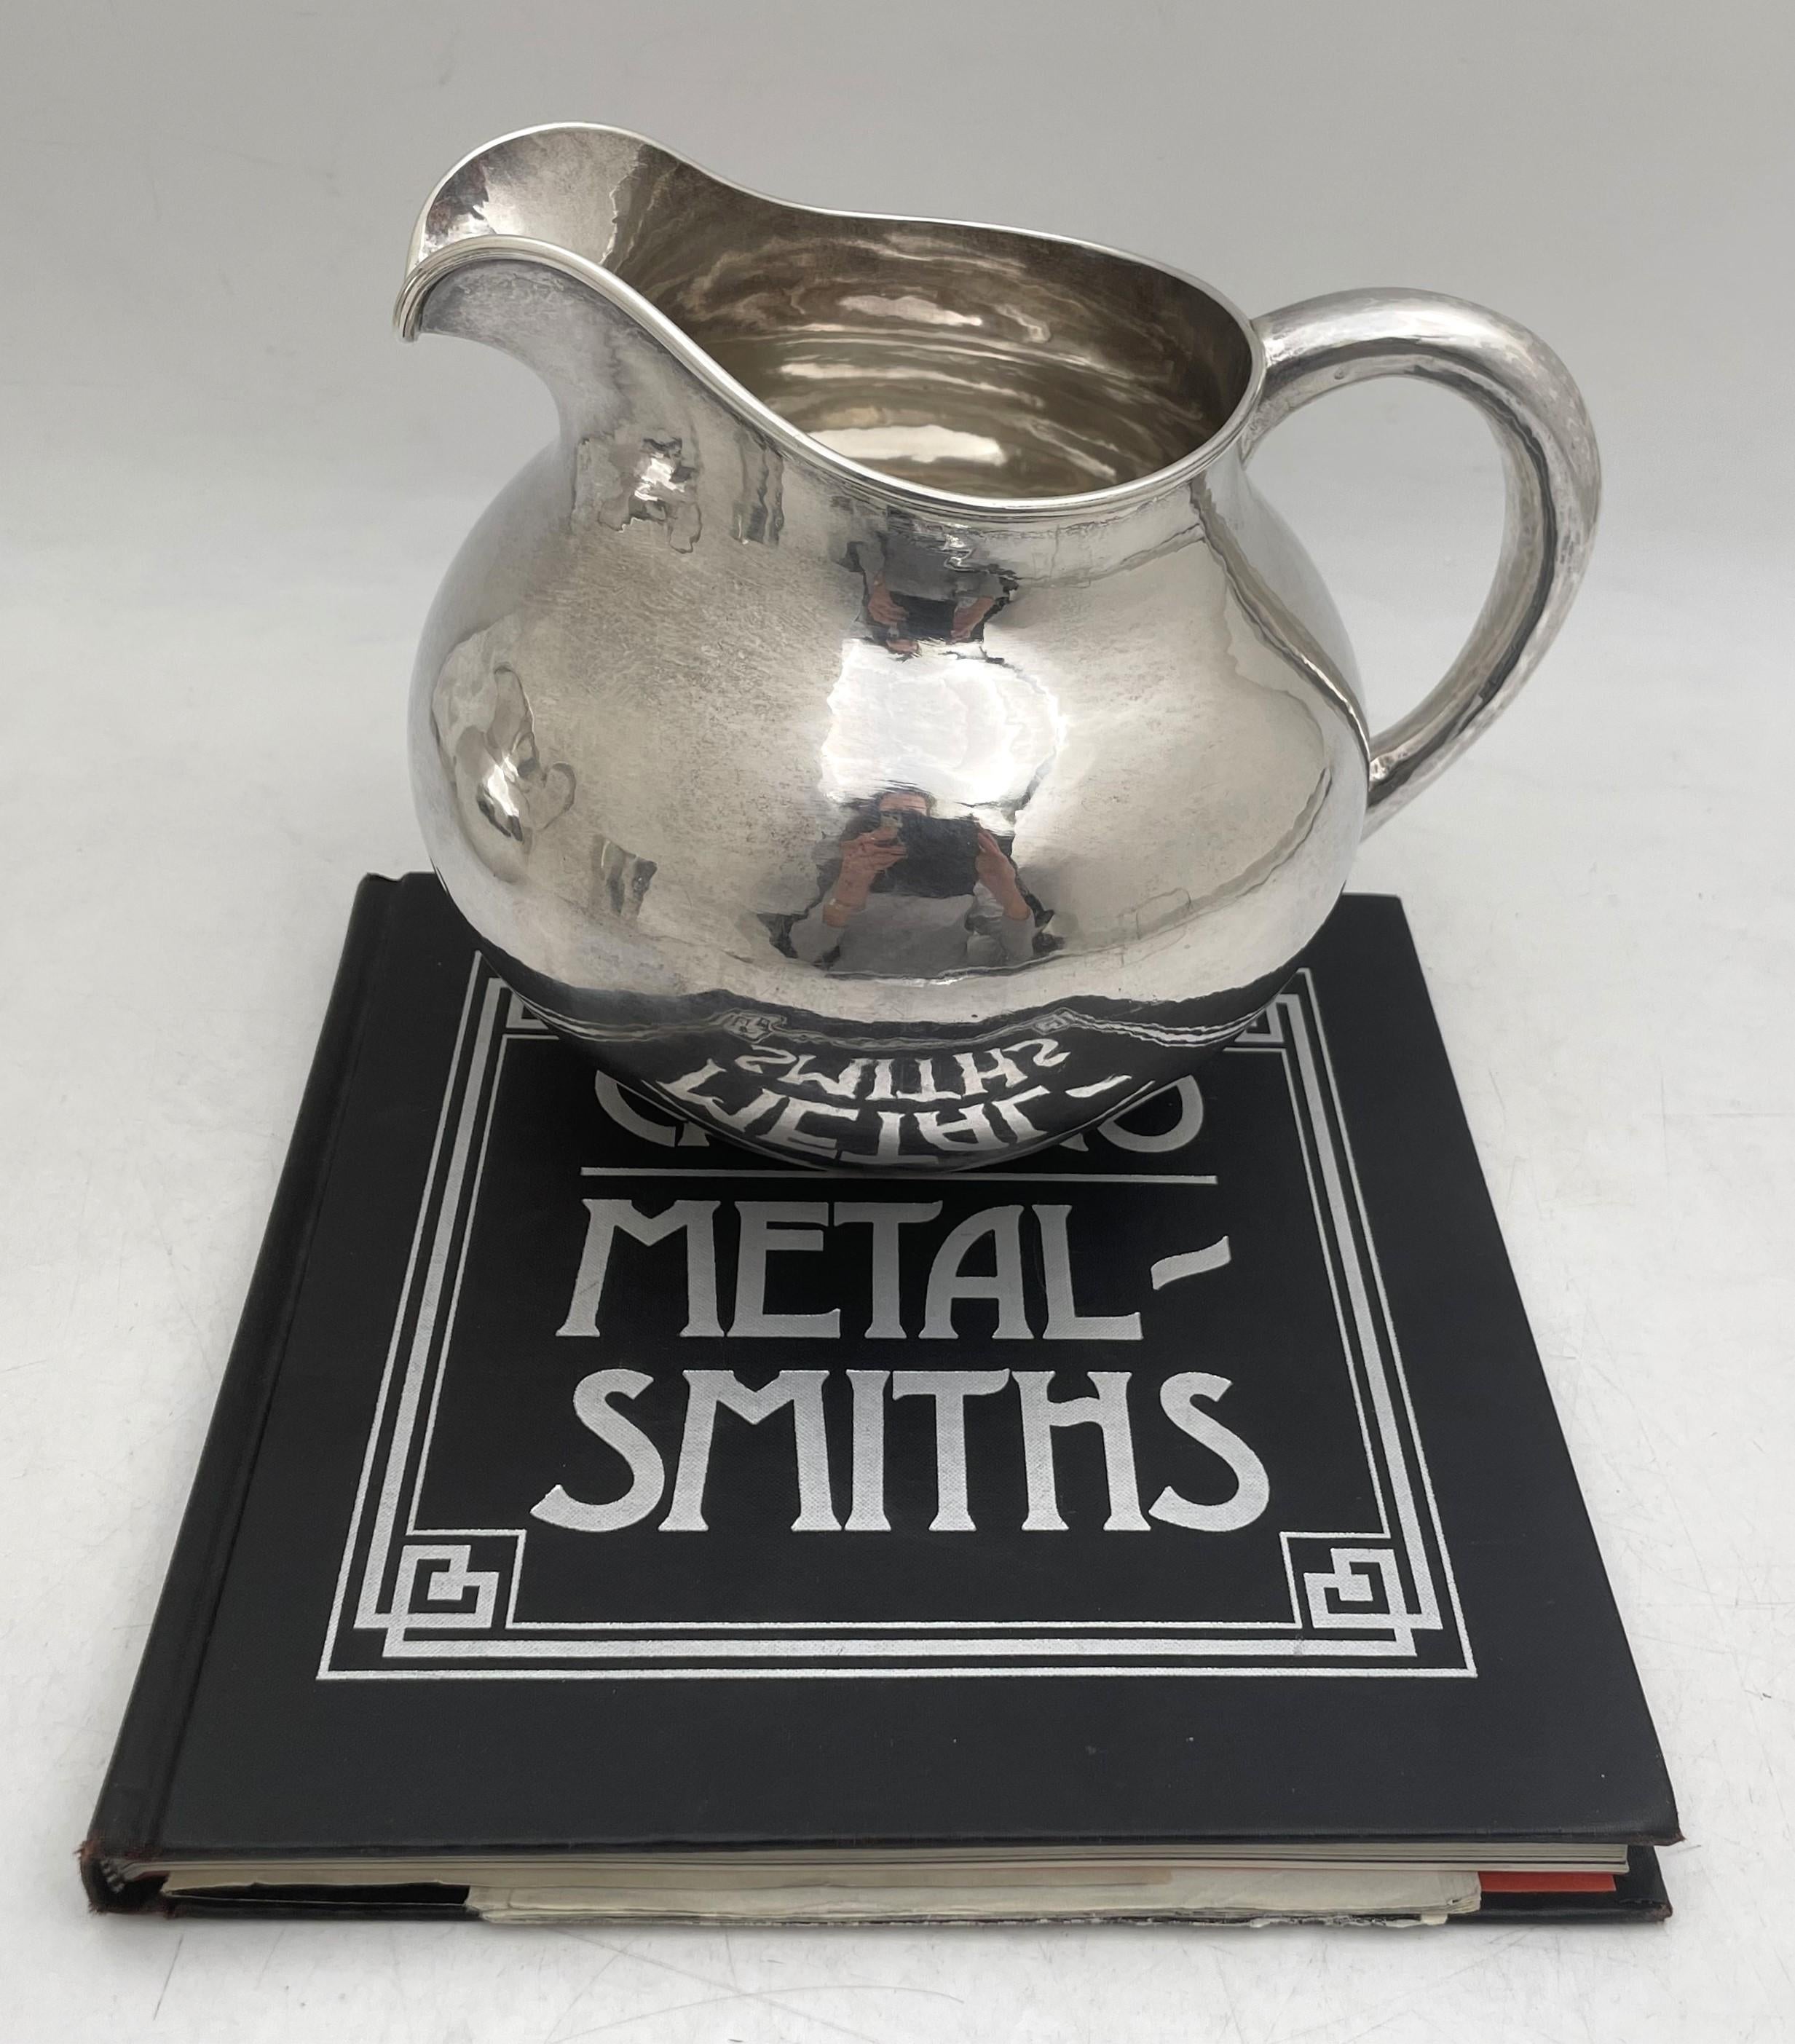 The Kalo Shops, sterling silver beautifully hand wrought pitcher in Arts & Crafts style in an elegant, curvilinear design made between 1912 and 1916. It measures 7'' in height by 8'' from handle to spout, weighs 19.8 troy ounces, and bears hallmarks